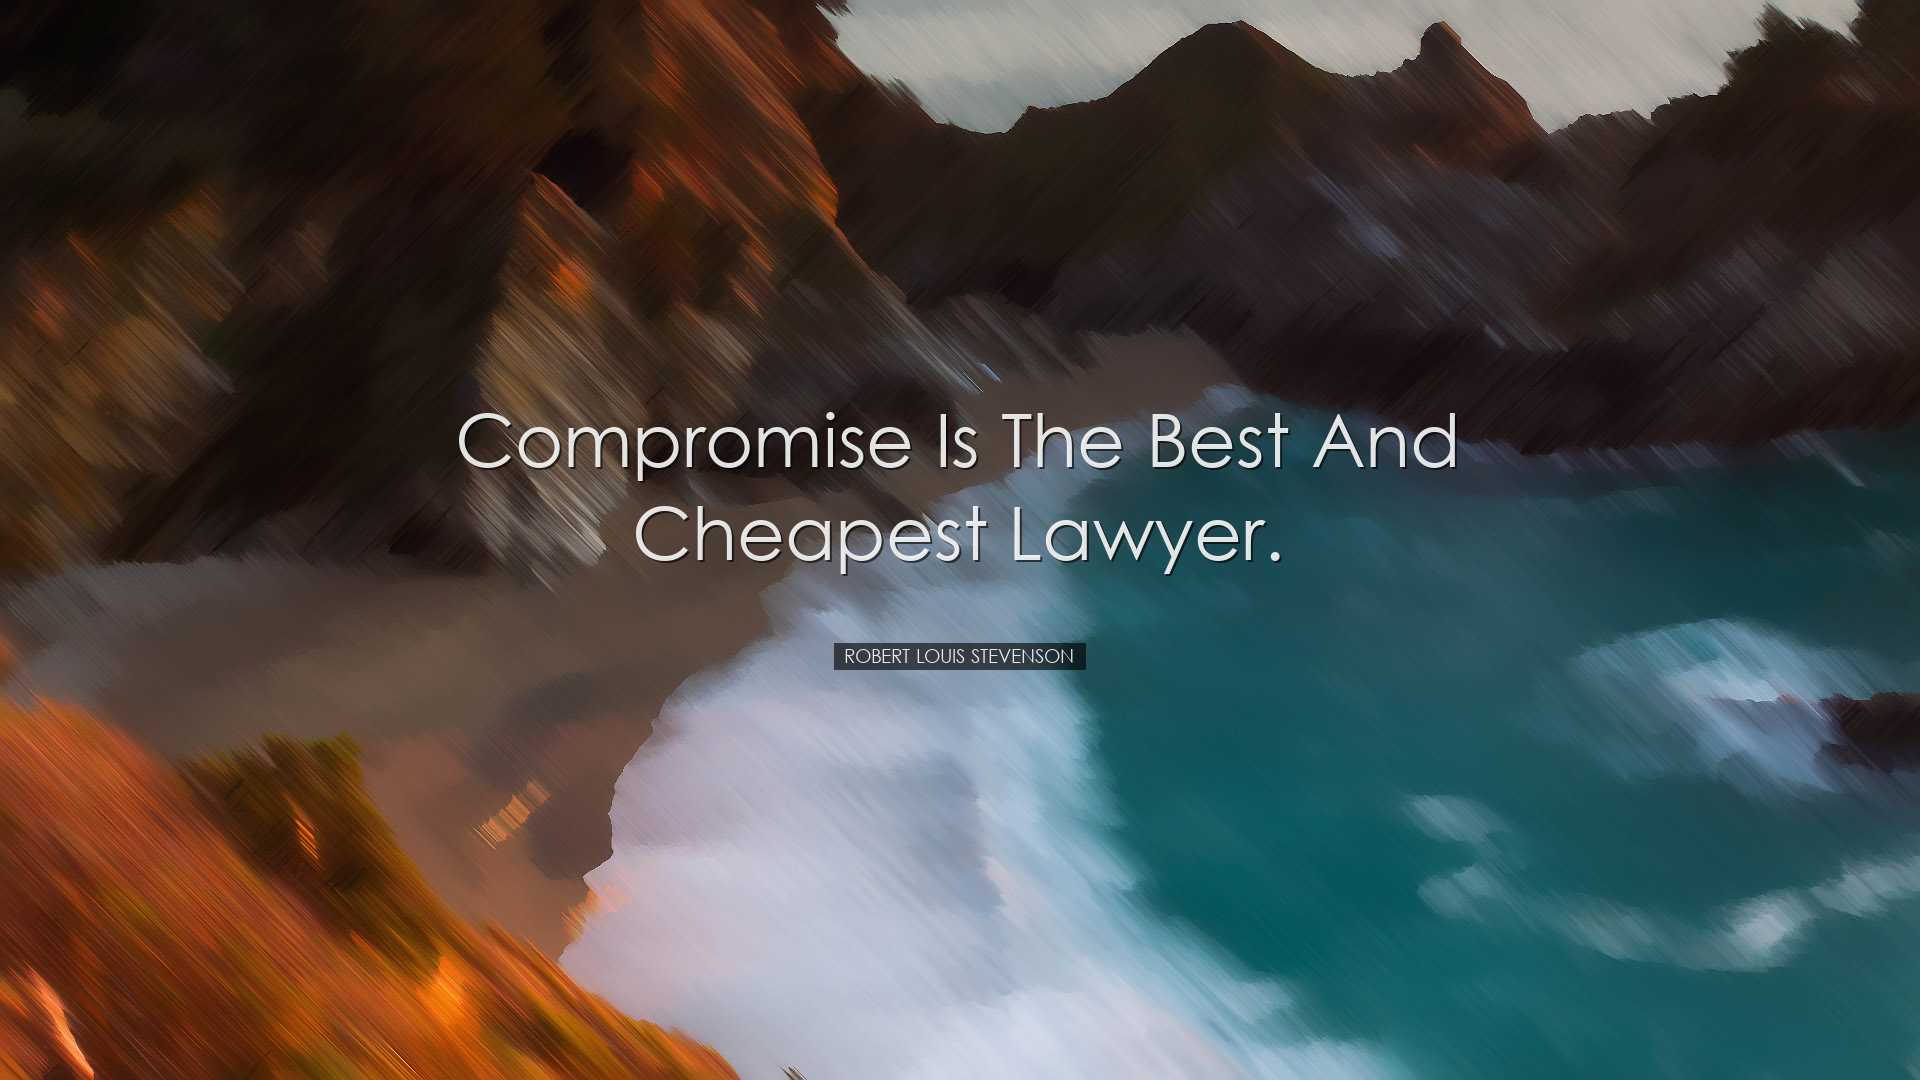 Compromise is the best and cheapest lawyer. - Robert Louis Stevens